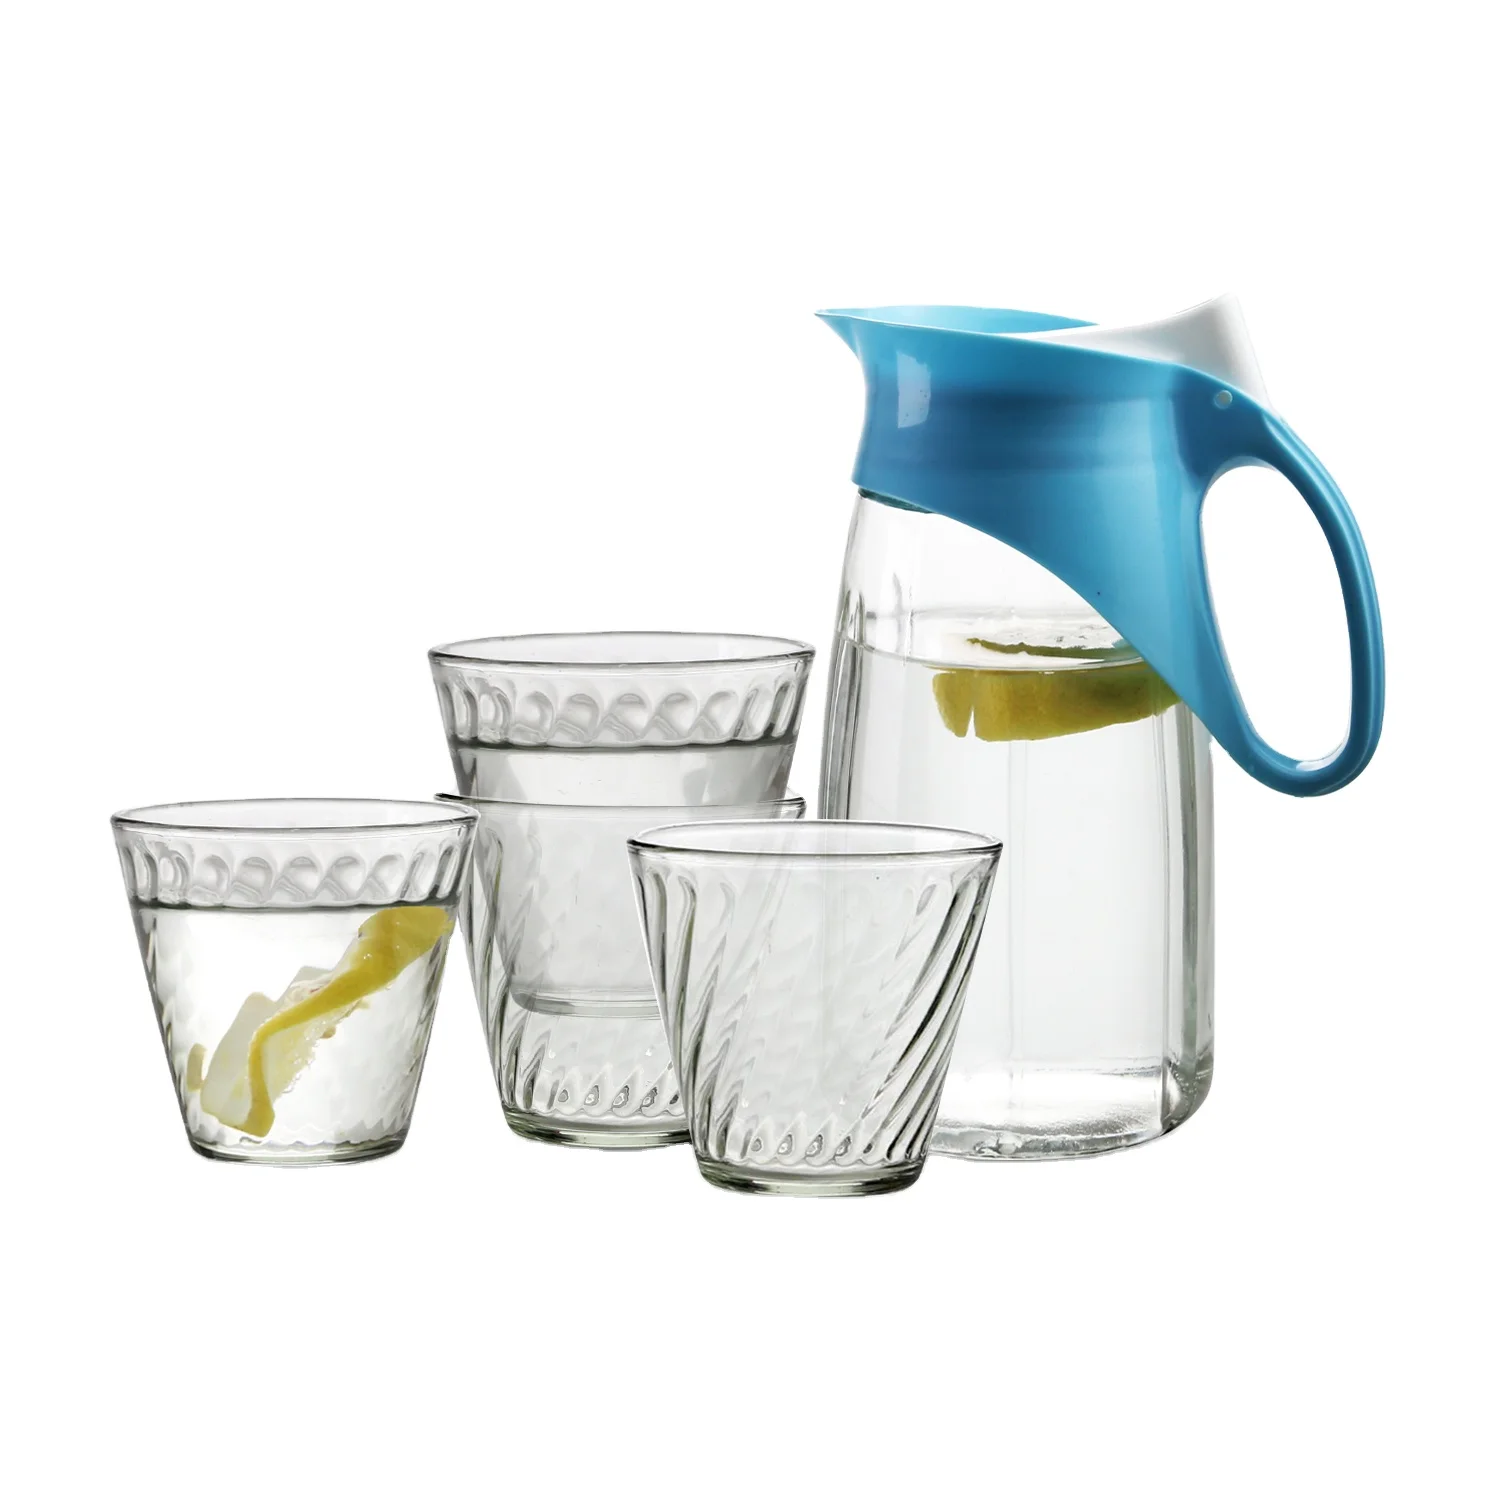 New Type Customized gifts Water ware 5 Pieces Heat Resistant Glass Water Jug Water Jug Drinking Set